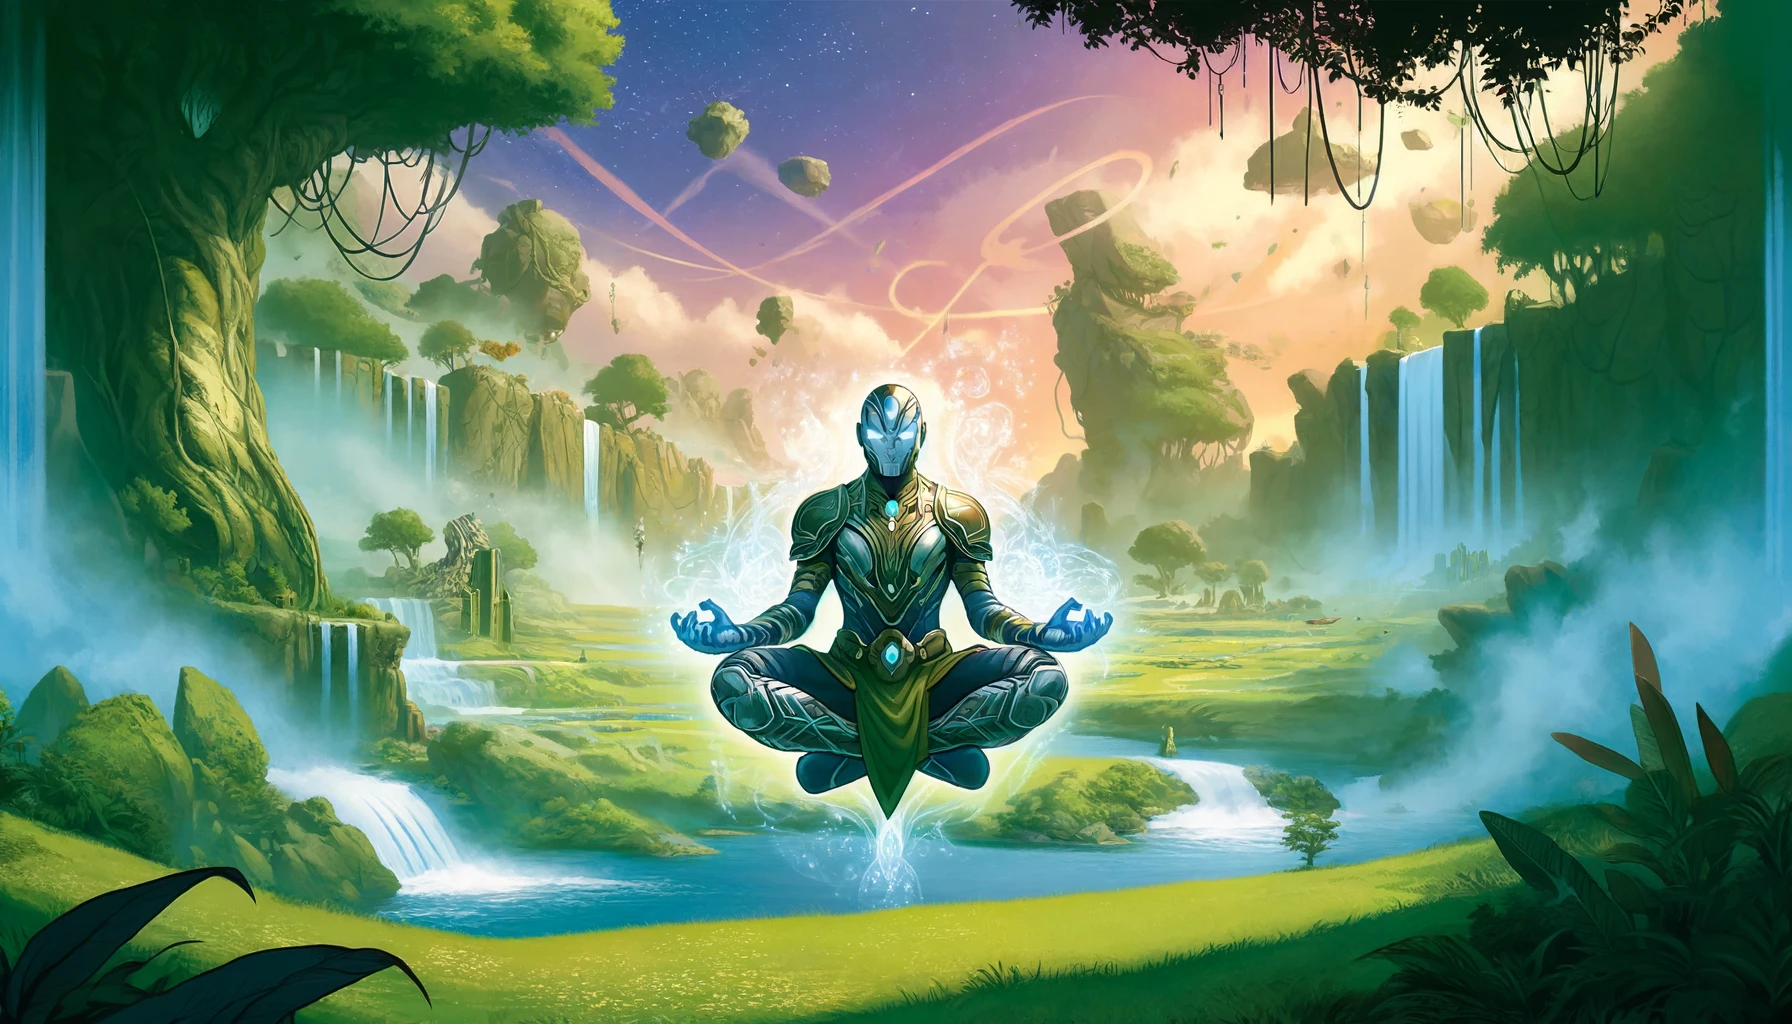 A tranquil and mystical landscape in Marvel Snap, with lush greenery, flowing rivers, and ancient ruins. A powerful character meditates in the foreground, surrounded by a glowing aura, blending harmoniously with the magical surroundings.